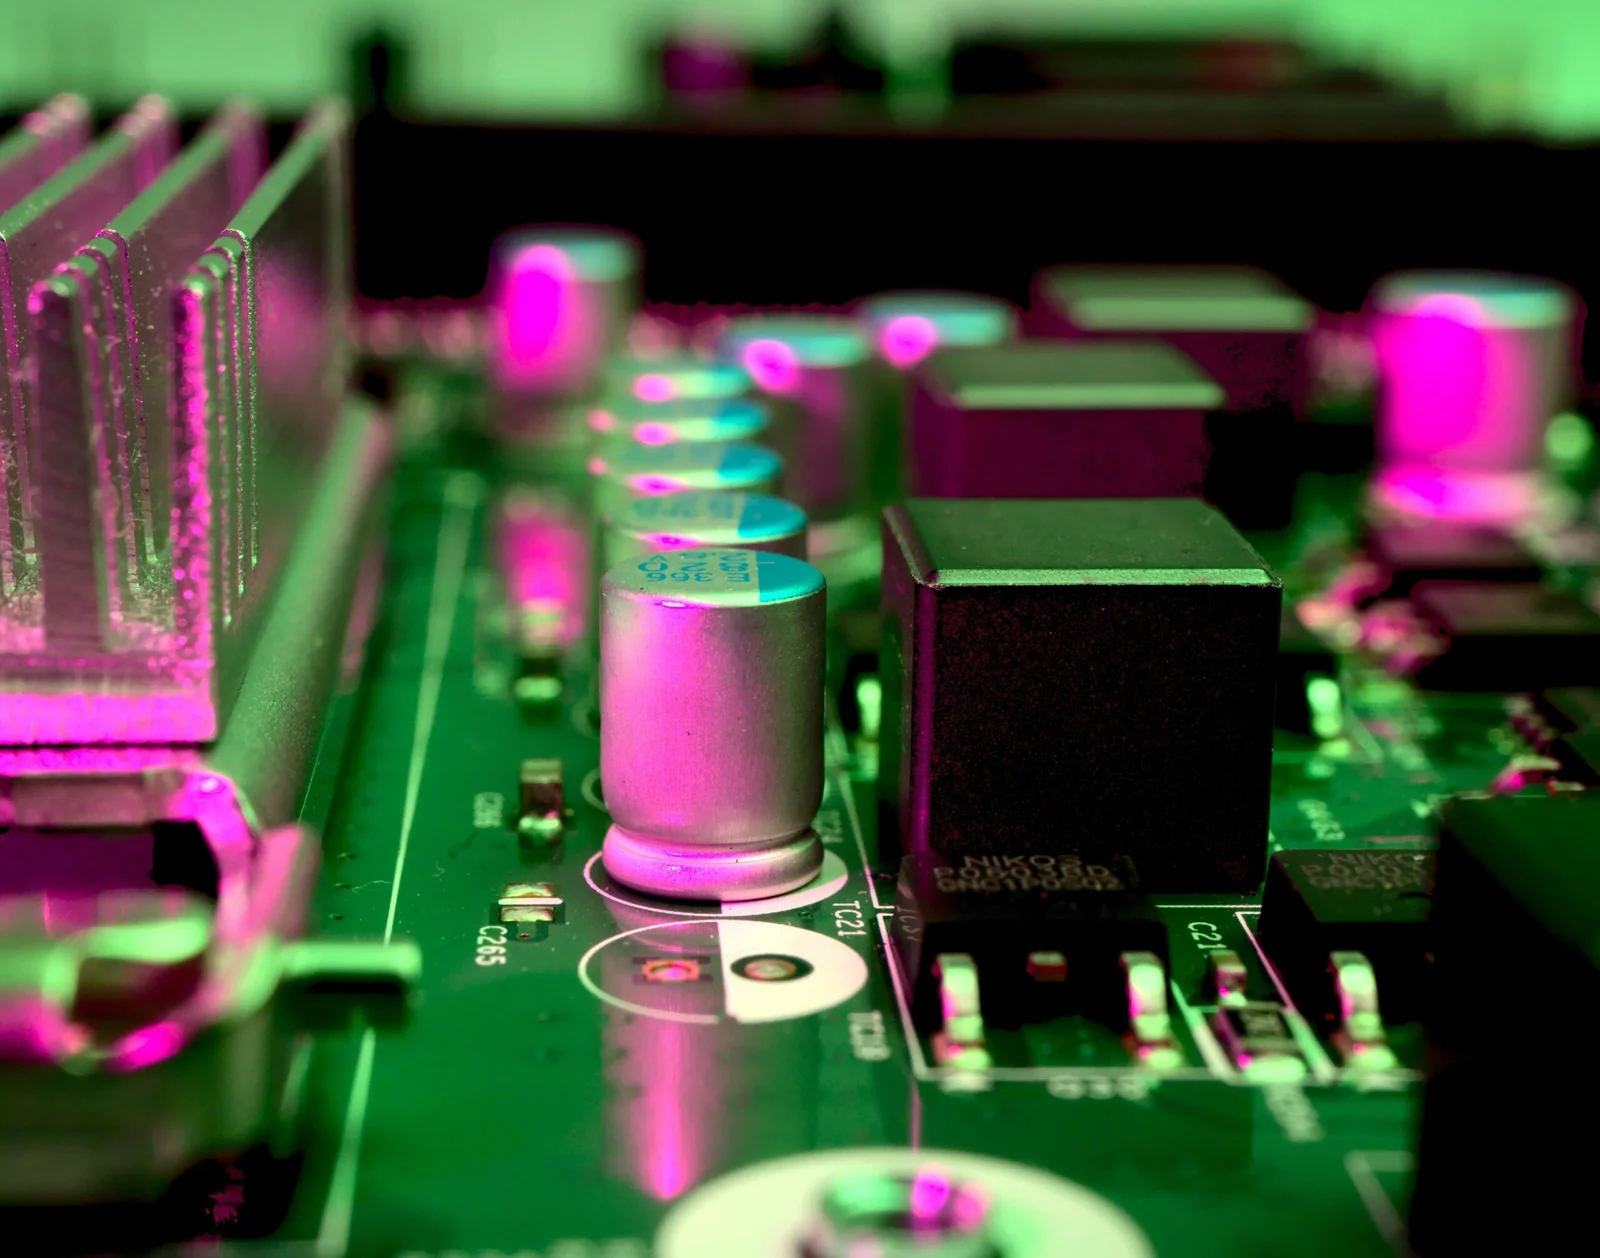 a close up of a computer motherboard with pink lights